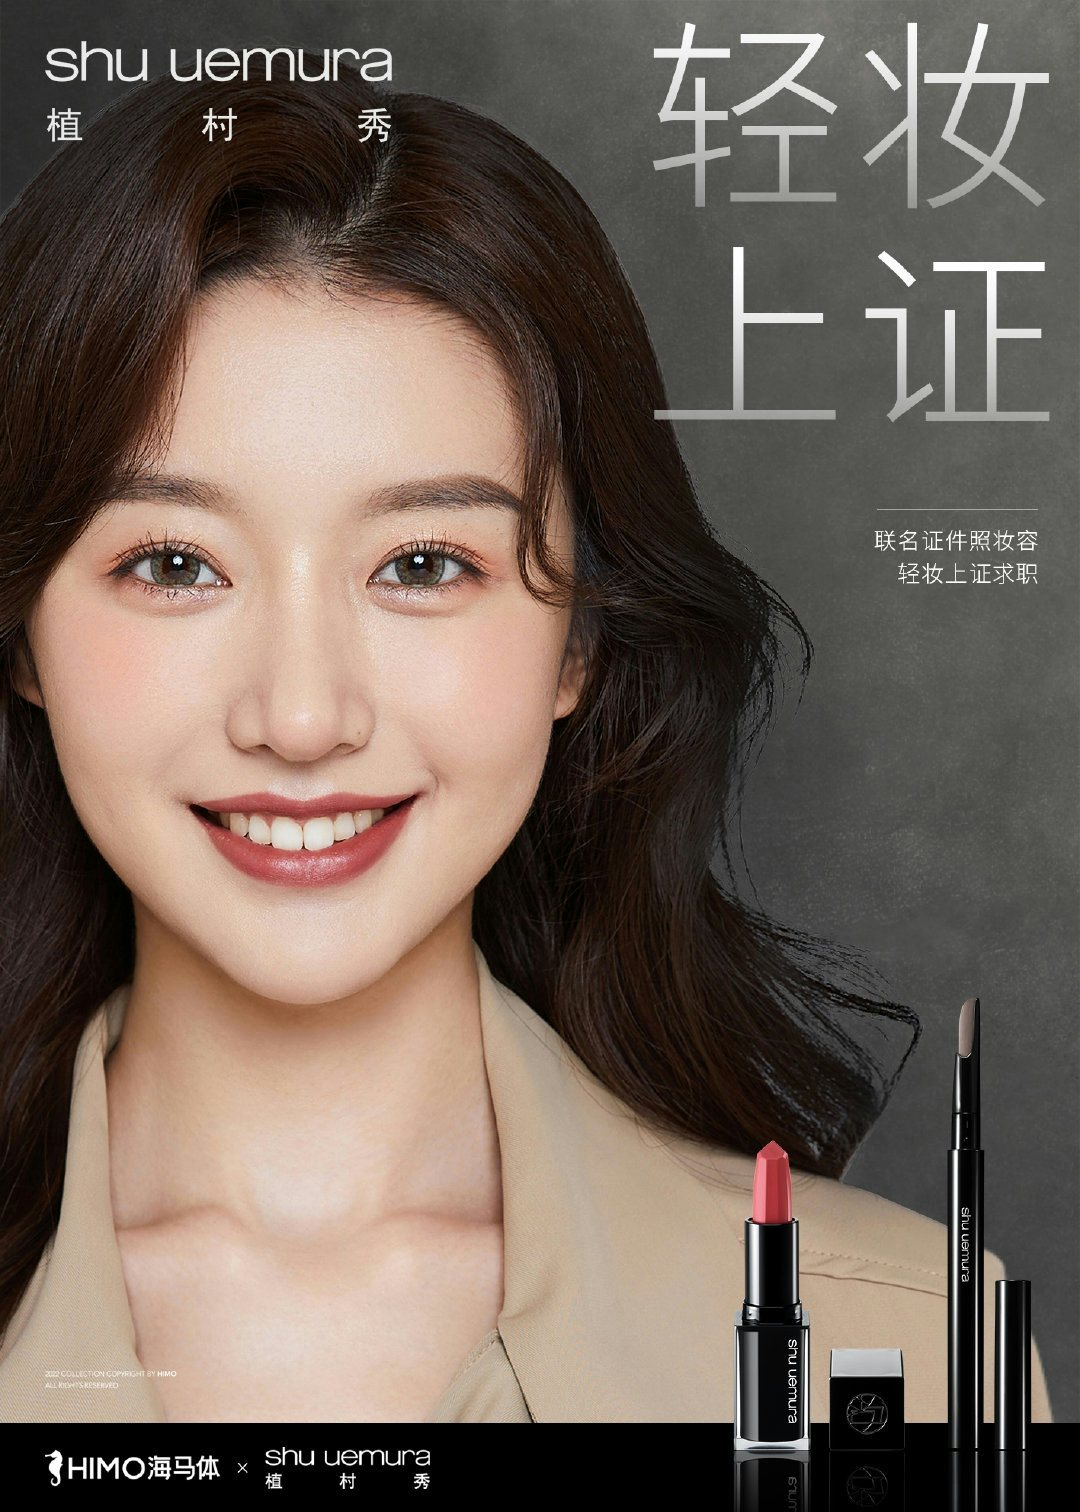 Shu Uemura has consolidated awareness of its eyebrow pencil among young consumers through collaborations with photo studio Himomaster. Image: Shu Uemura